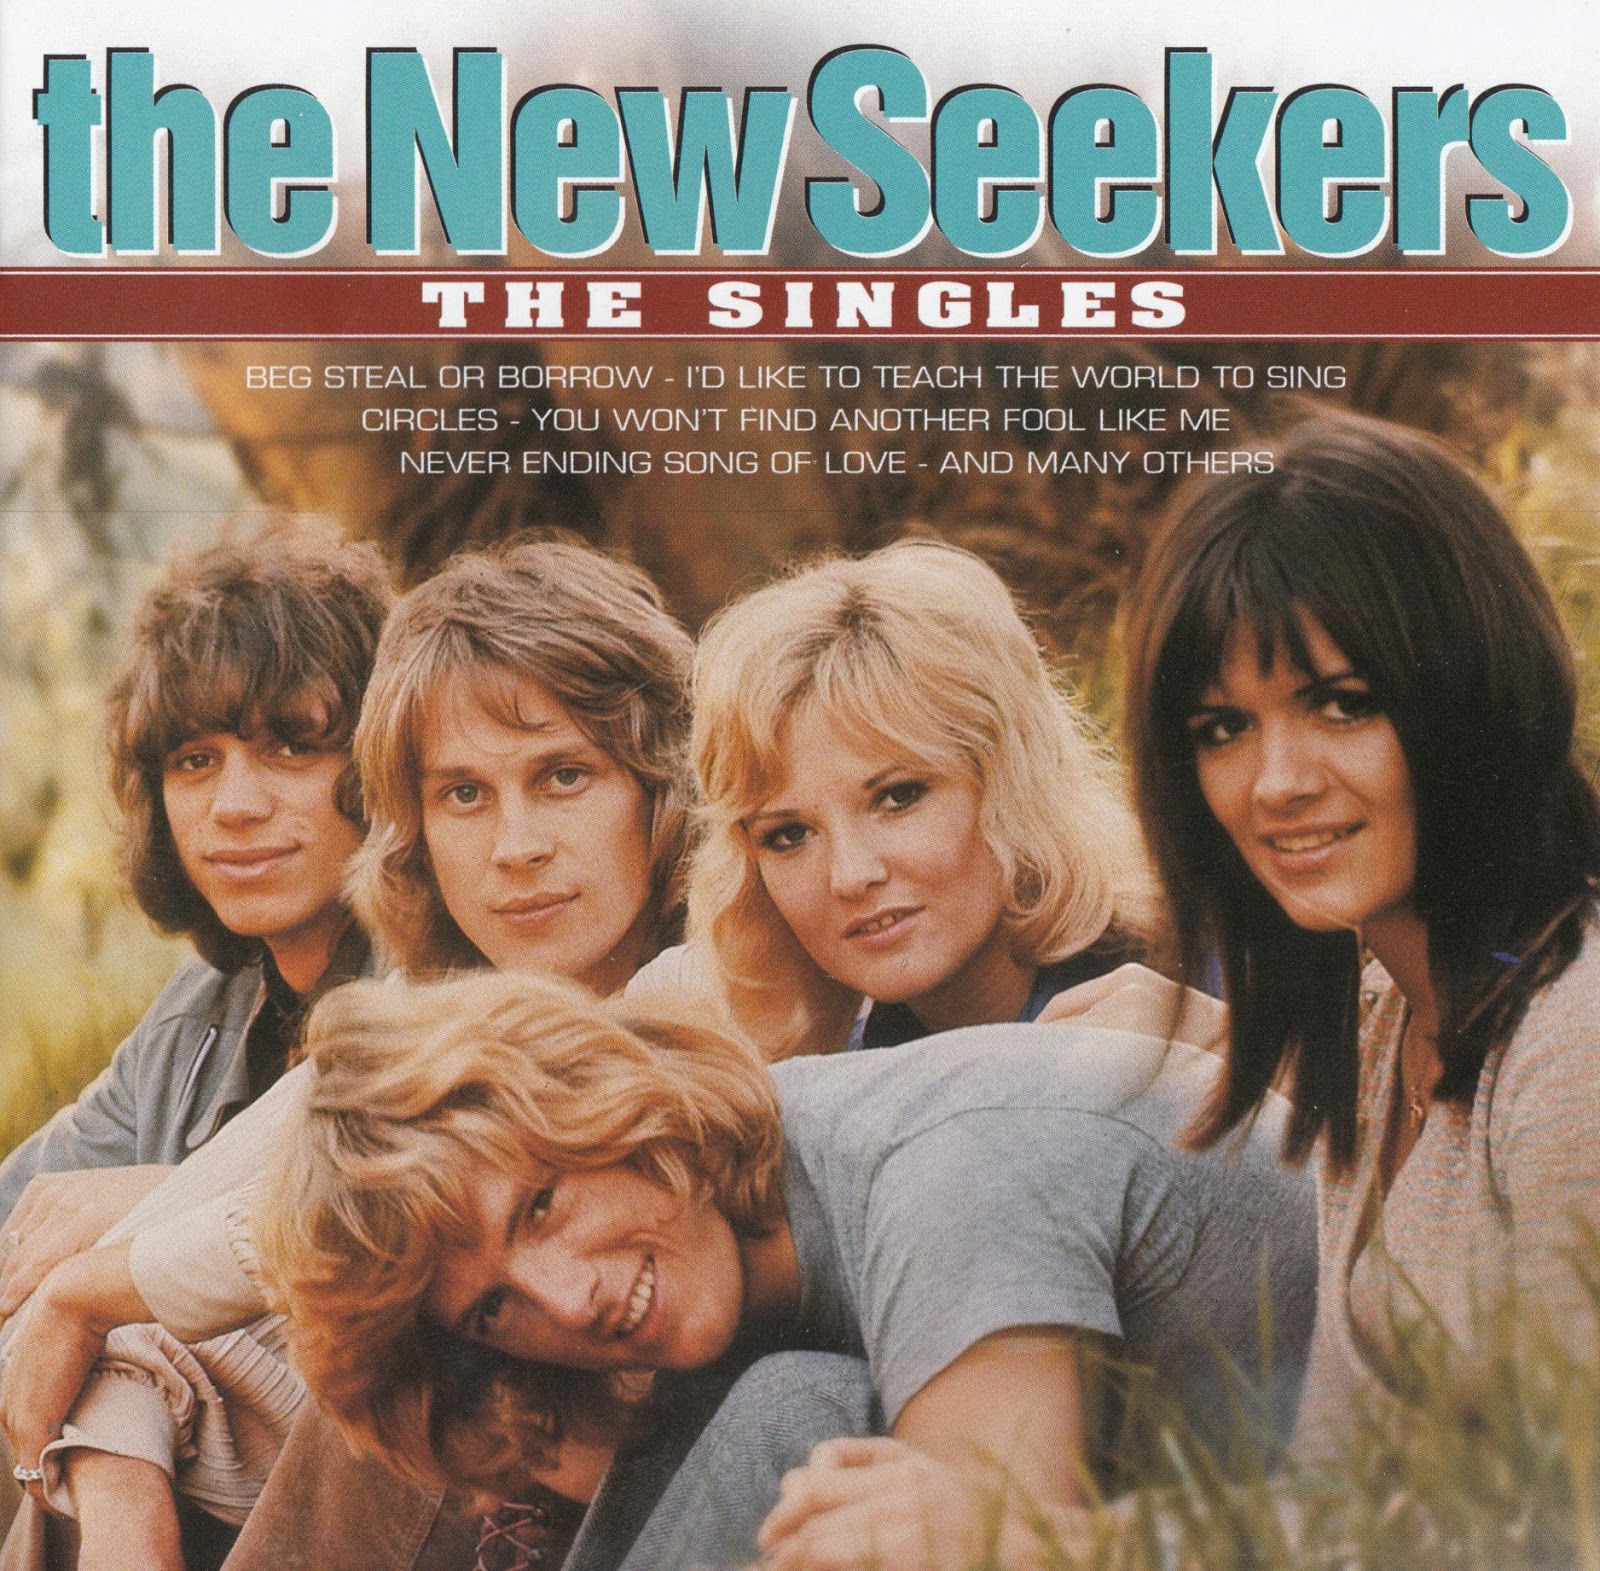 Has found another. Группа the Seekers. The New Seekers the Singles. The New Seekers the Singles CD. The New Seekers collection album.